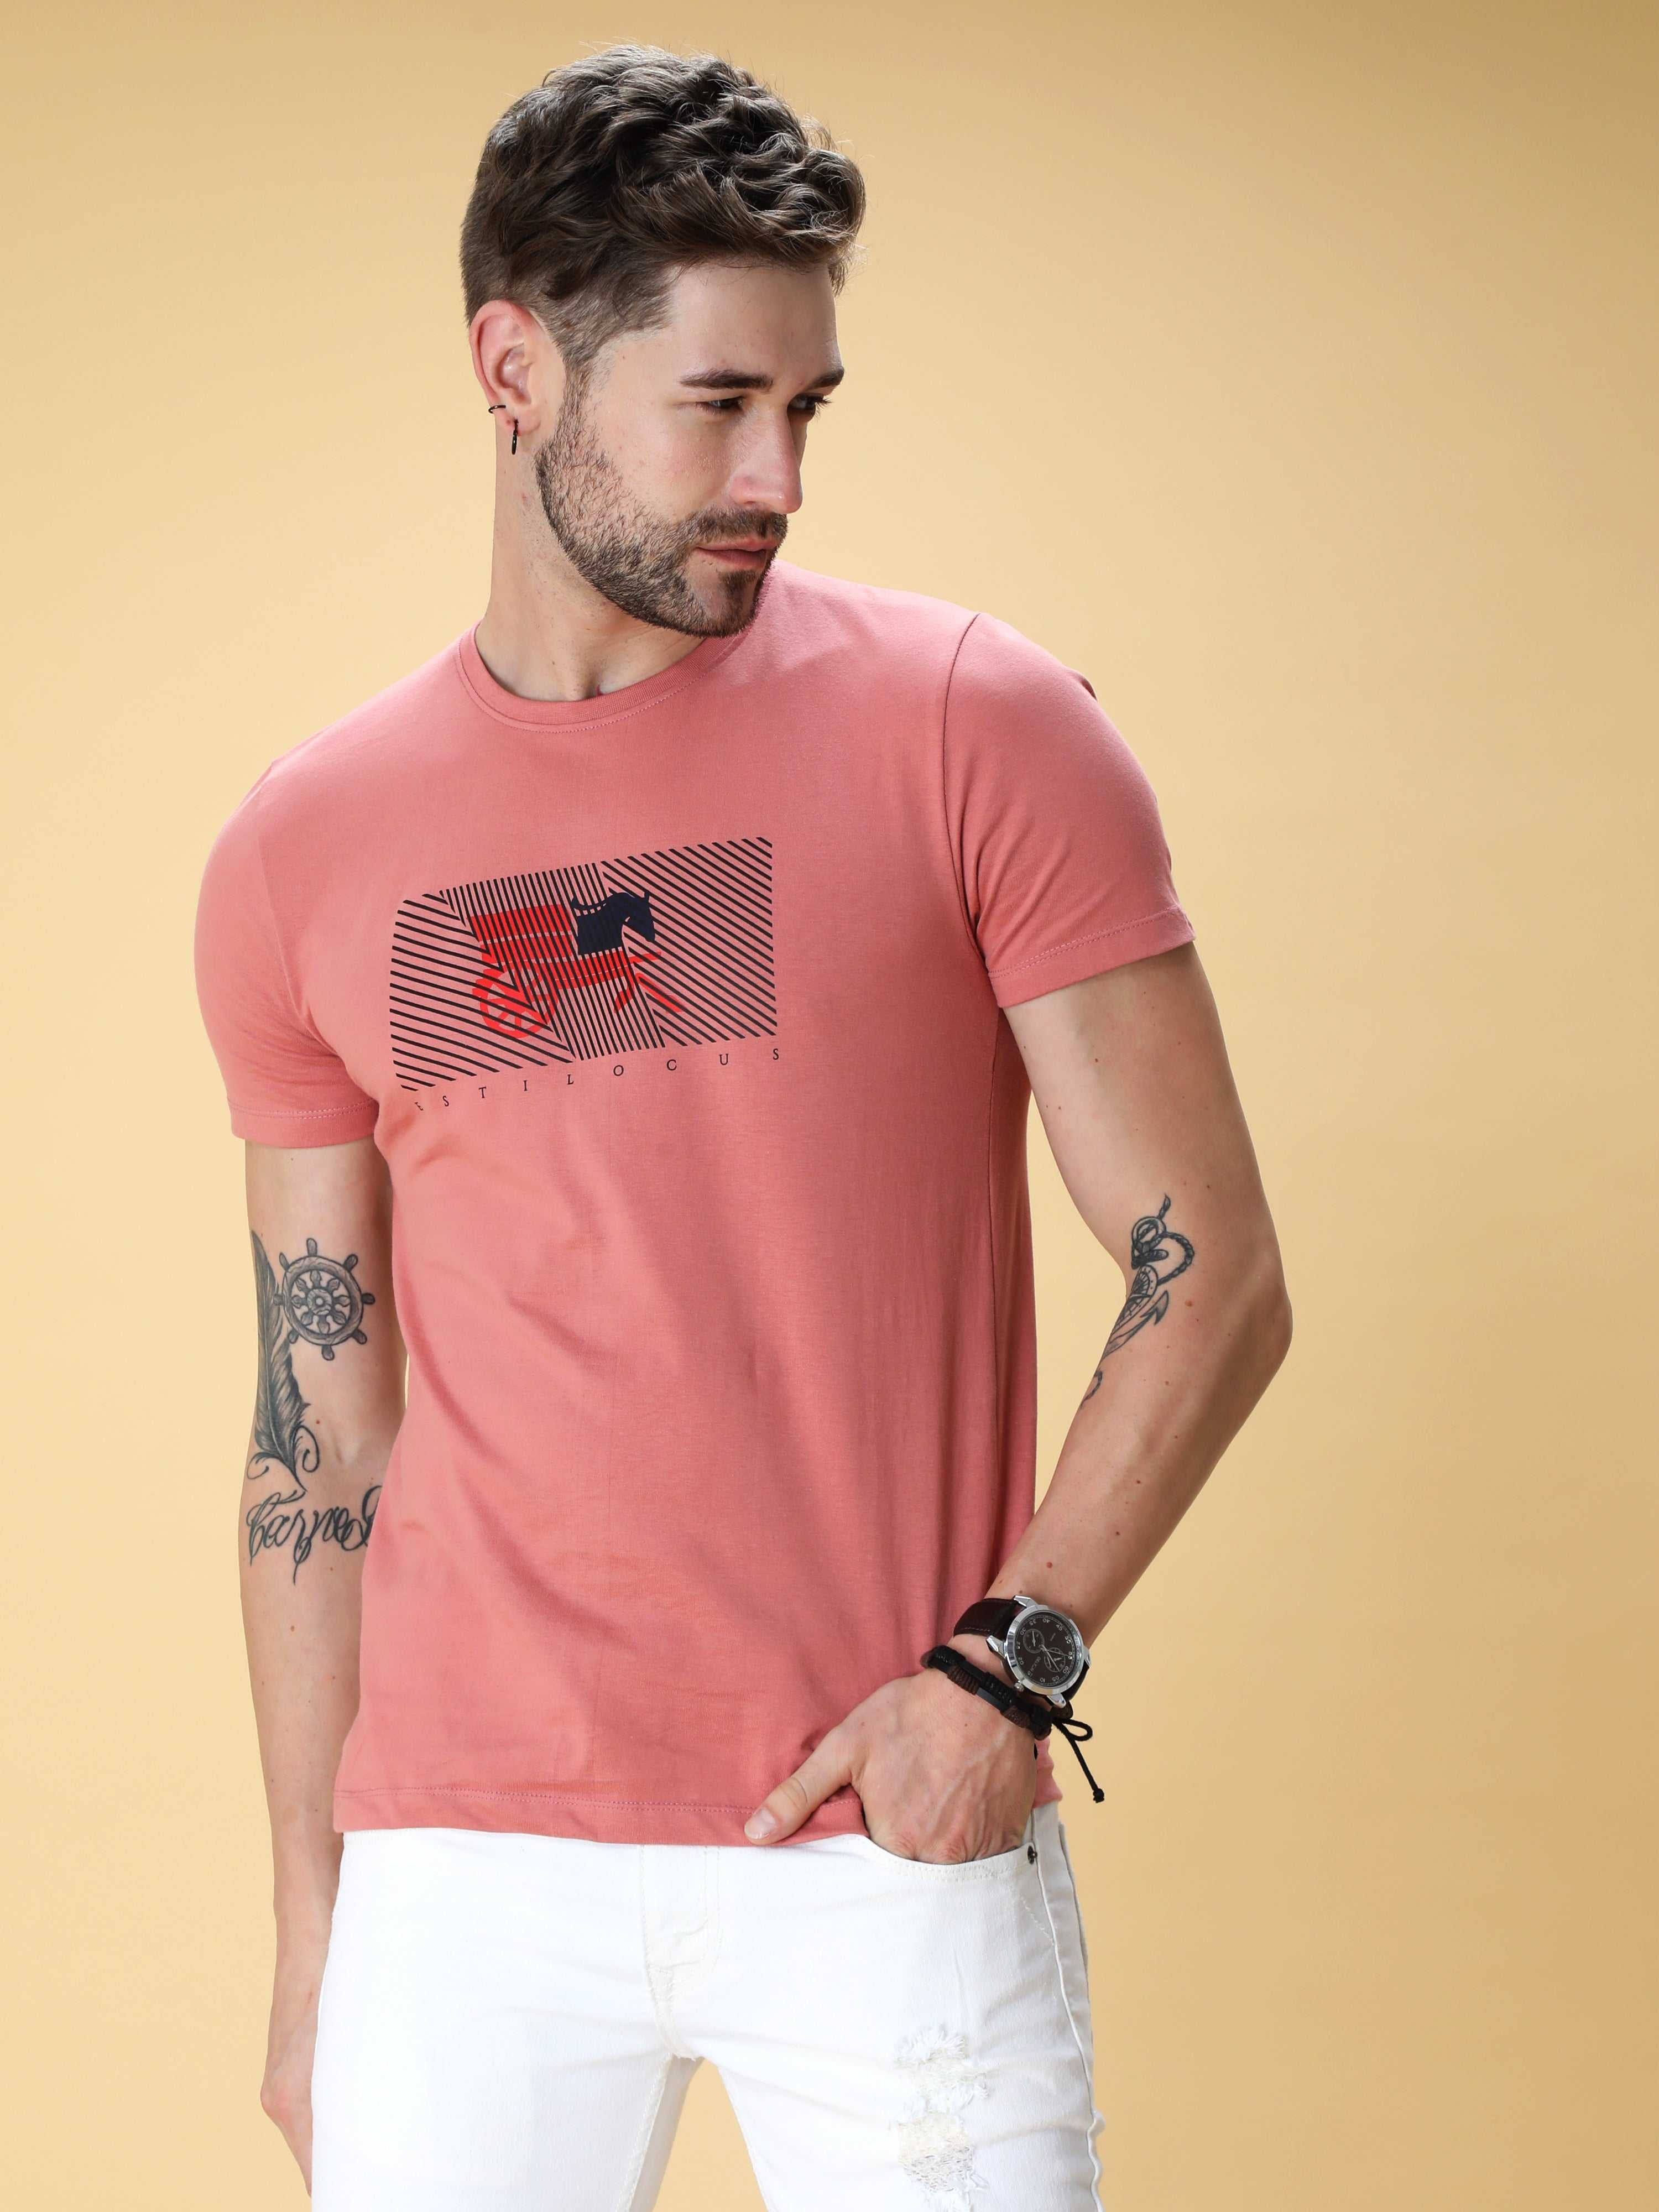 Coral Crew Neck T-Shirt shop online at Estilocus. This pure cotton printed T-shirt is a stylish go-to for laidback days. Cut in a comfy regular fit. • 100% Cotton knitted interlock 190GSM• Bio washed fabric• Round neck T-shirt • Half sleeve • Suits to wea